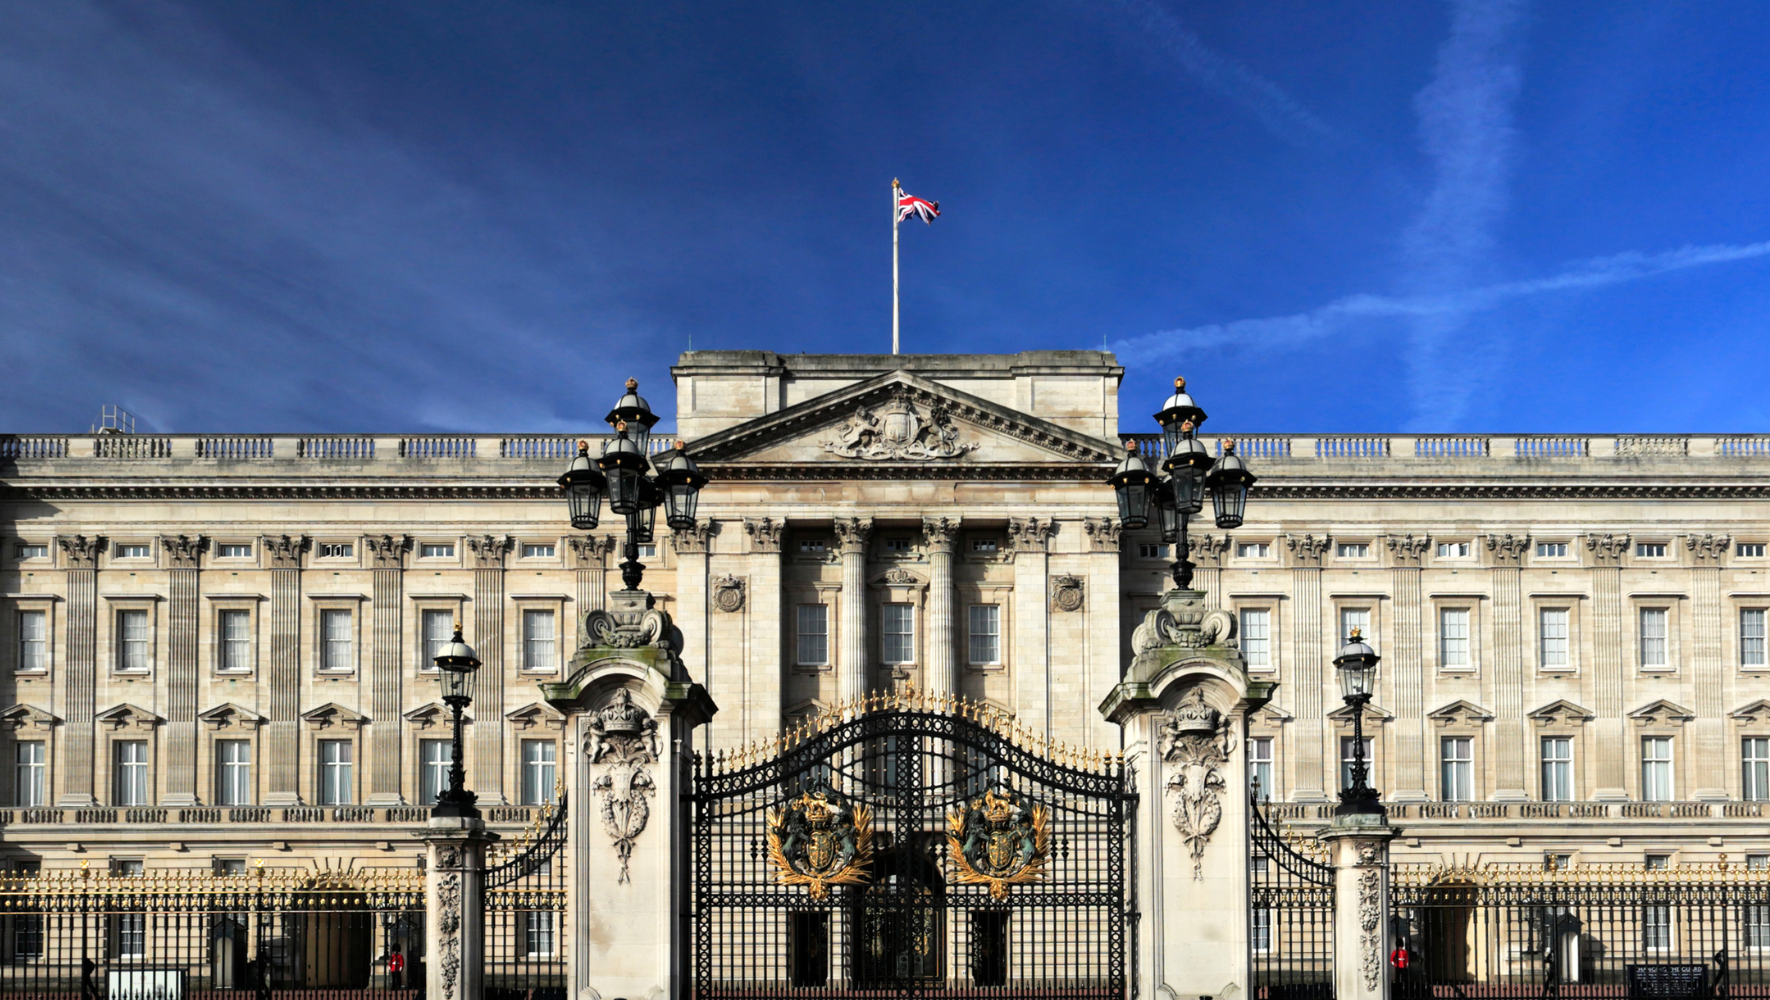 The front gates of Buckingham Palace, with the palace in the background.